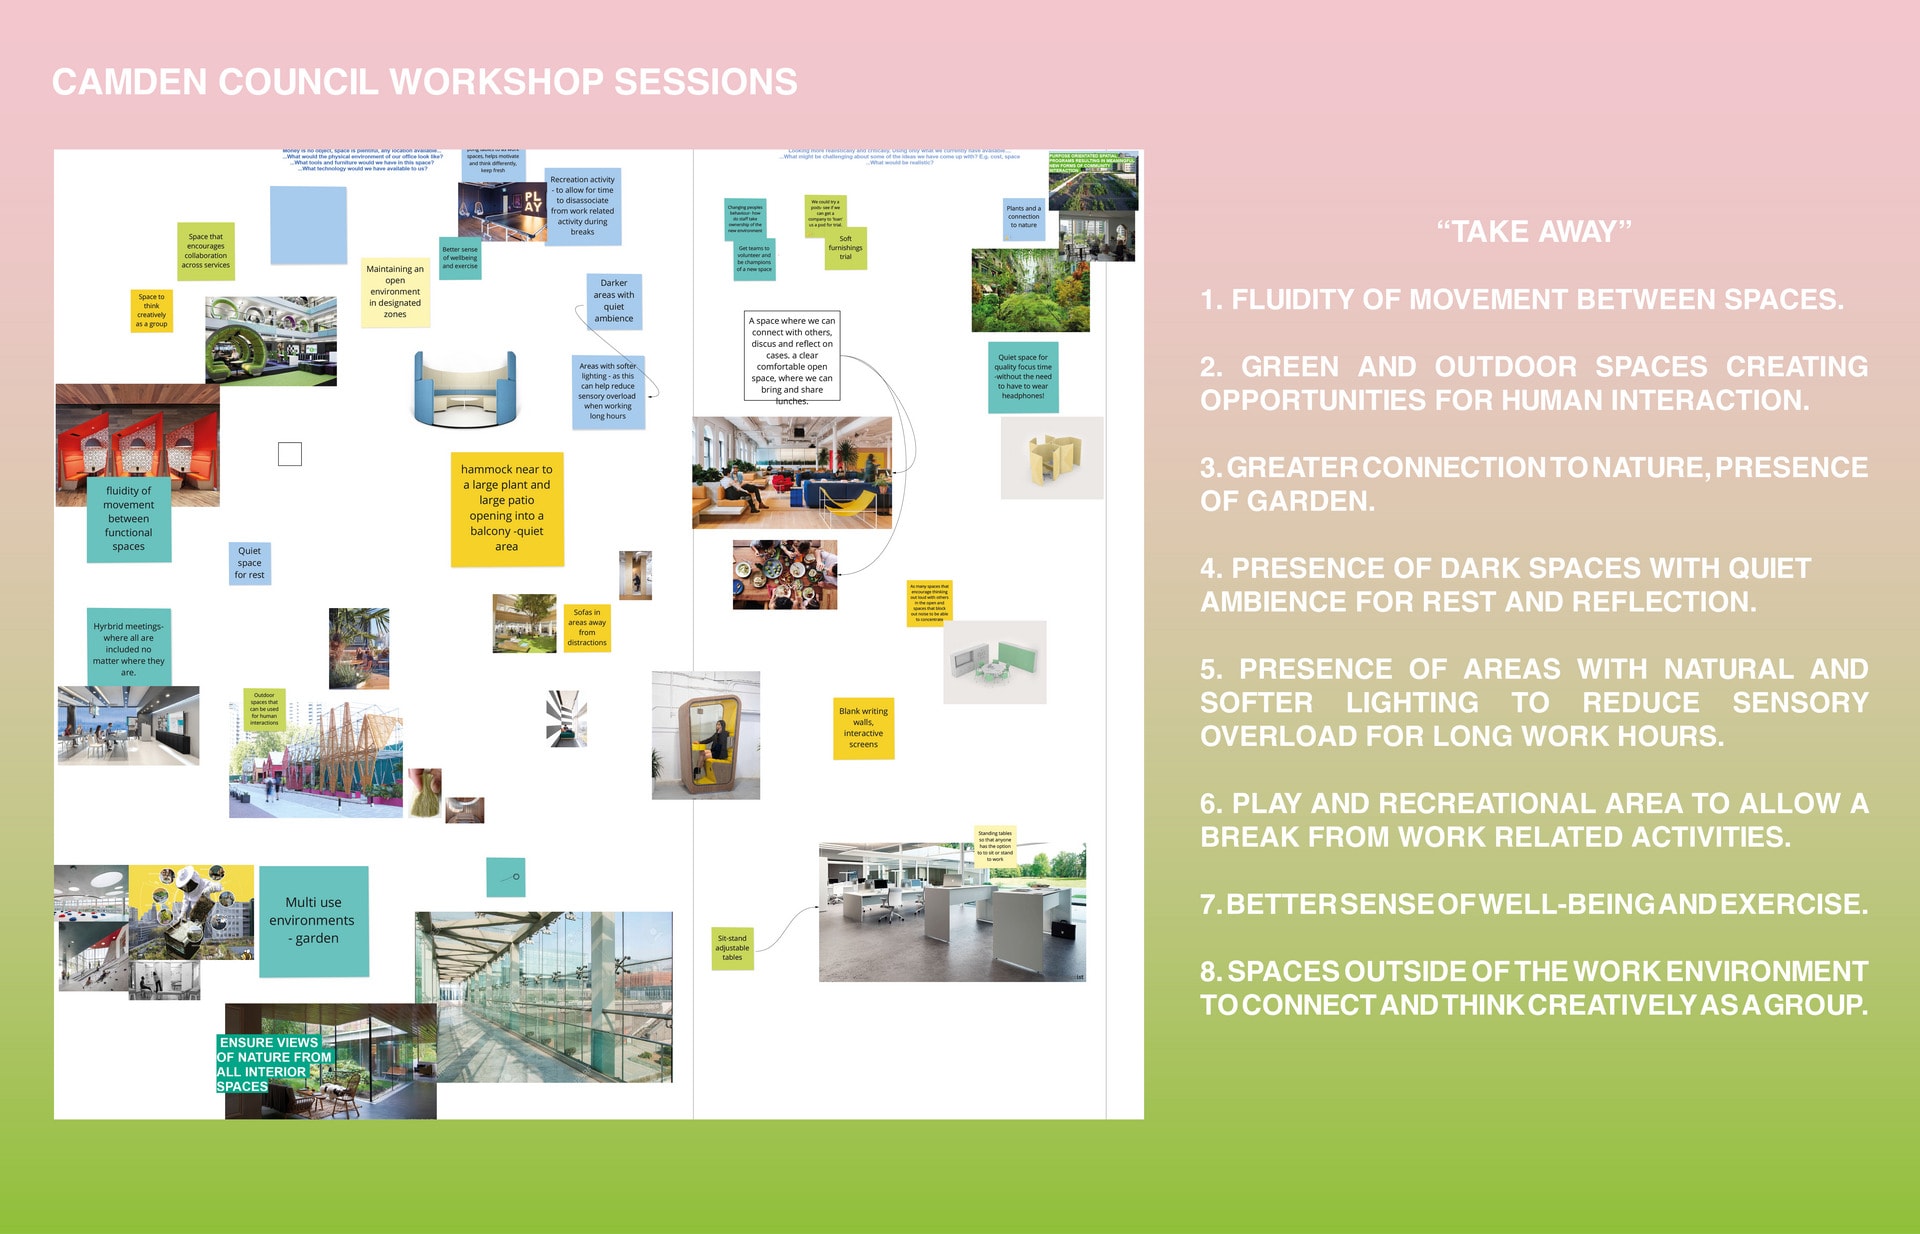 CAMDEN COUNCIL WORKSHOP SESSIONS